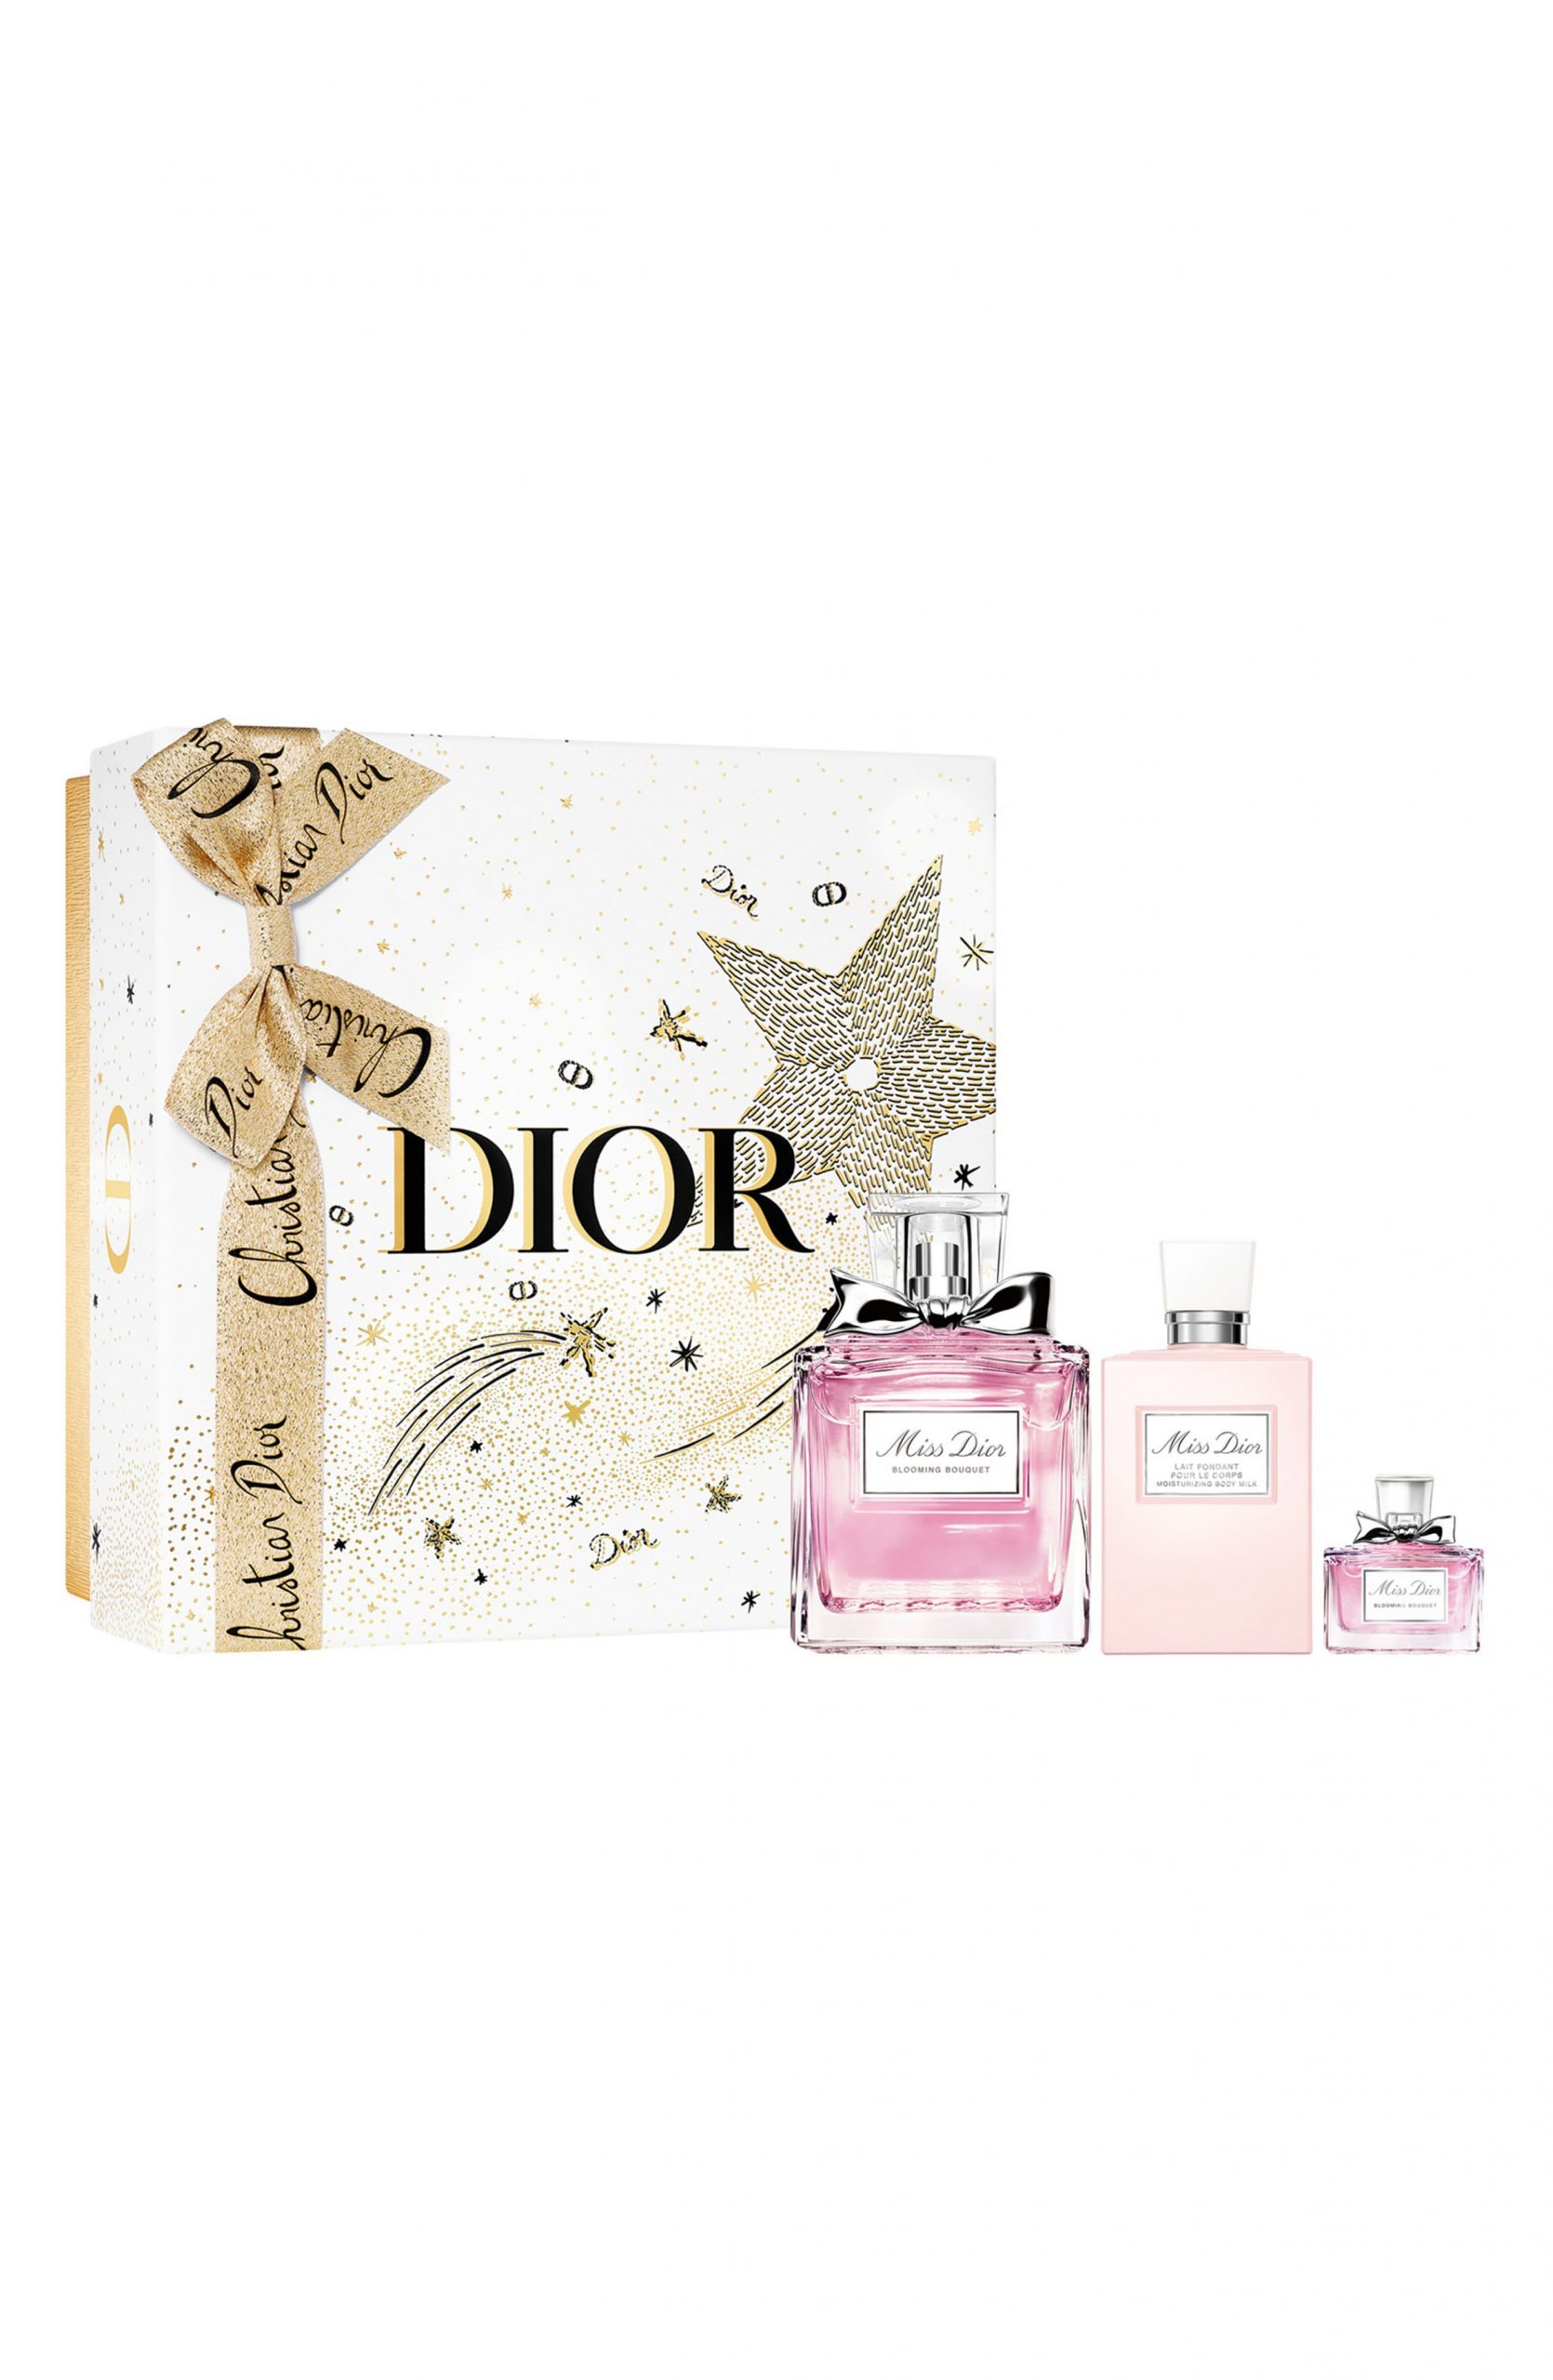 miss dior blooming bouquet set